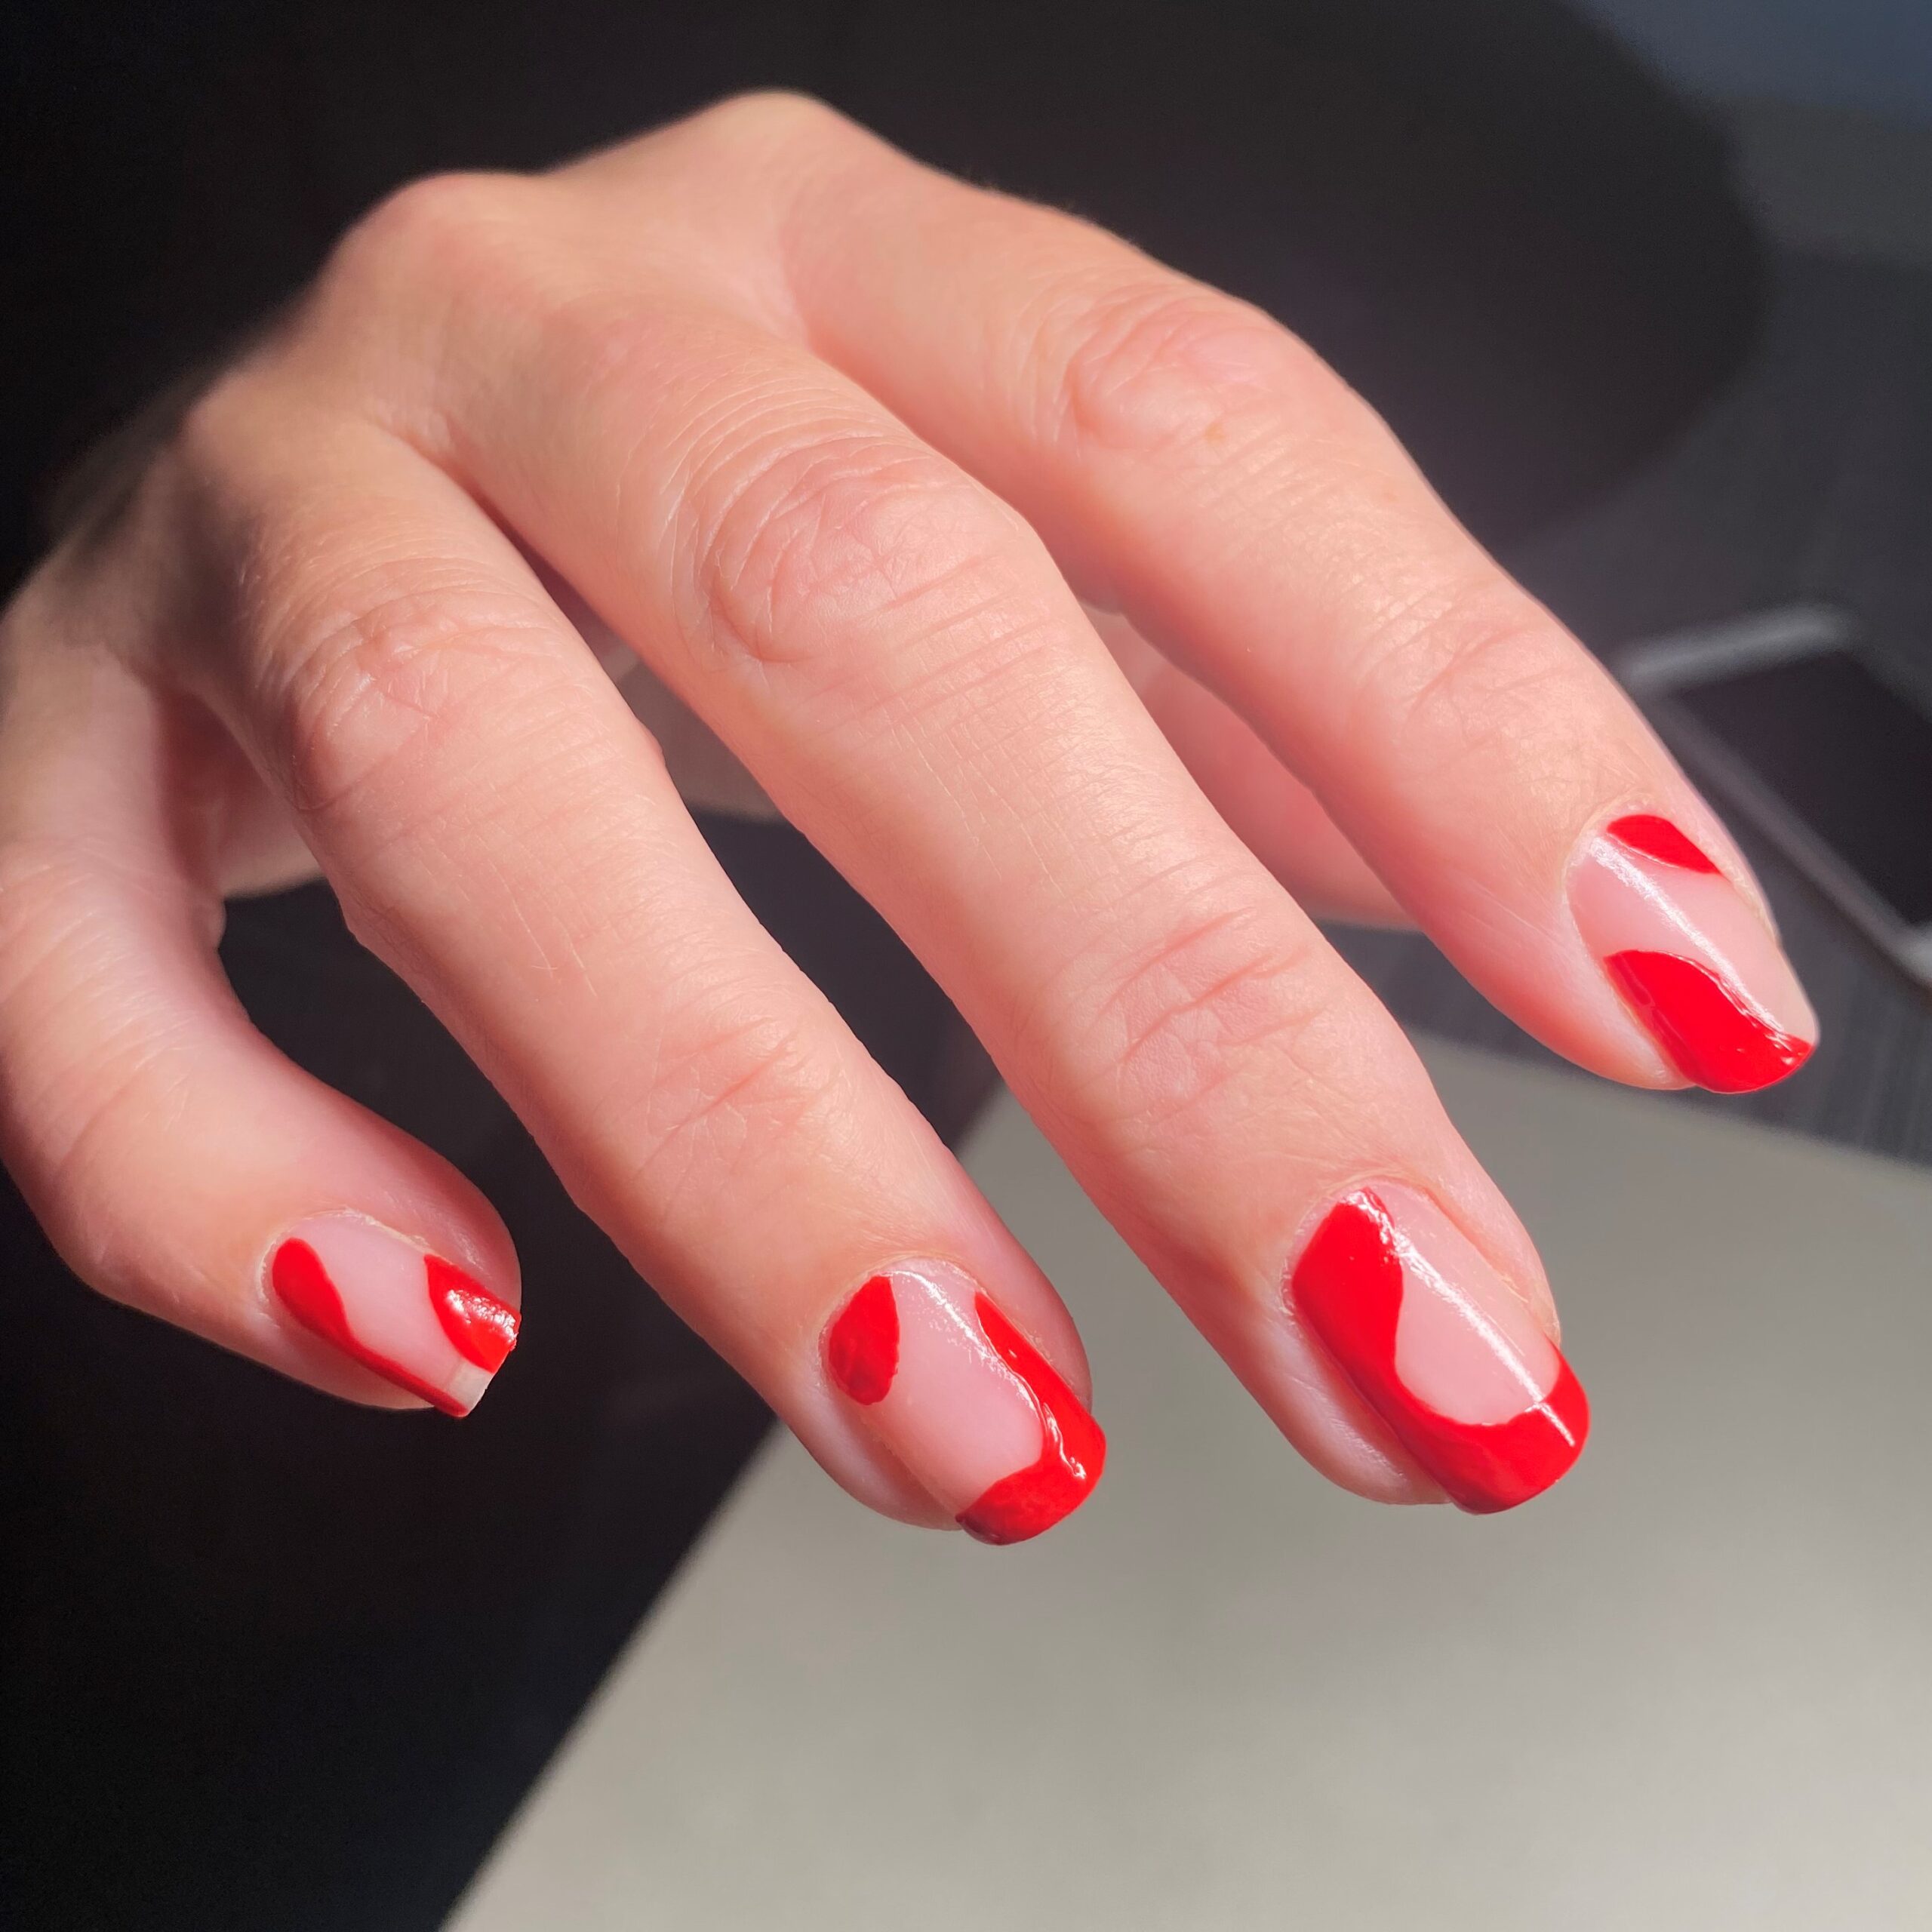 Festive Flourishes In Nail Art : Red French Tip Nails with Candy Cane